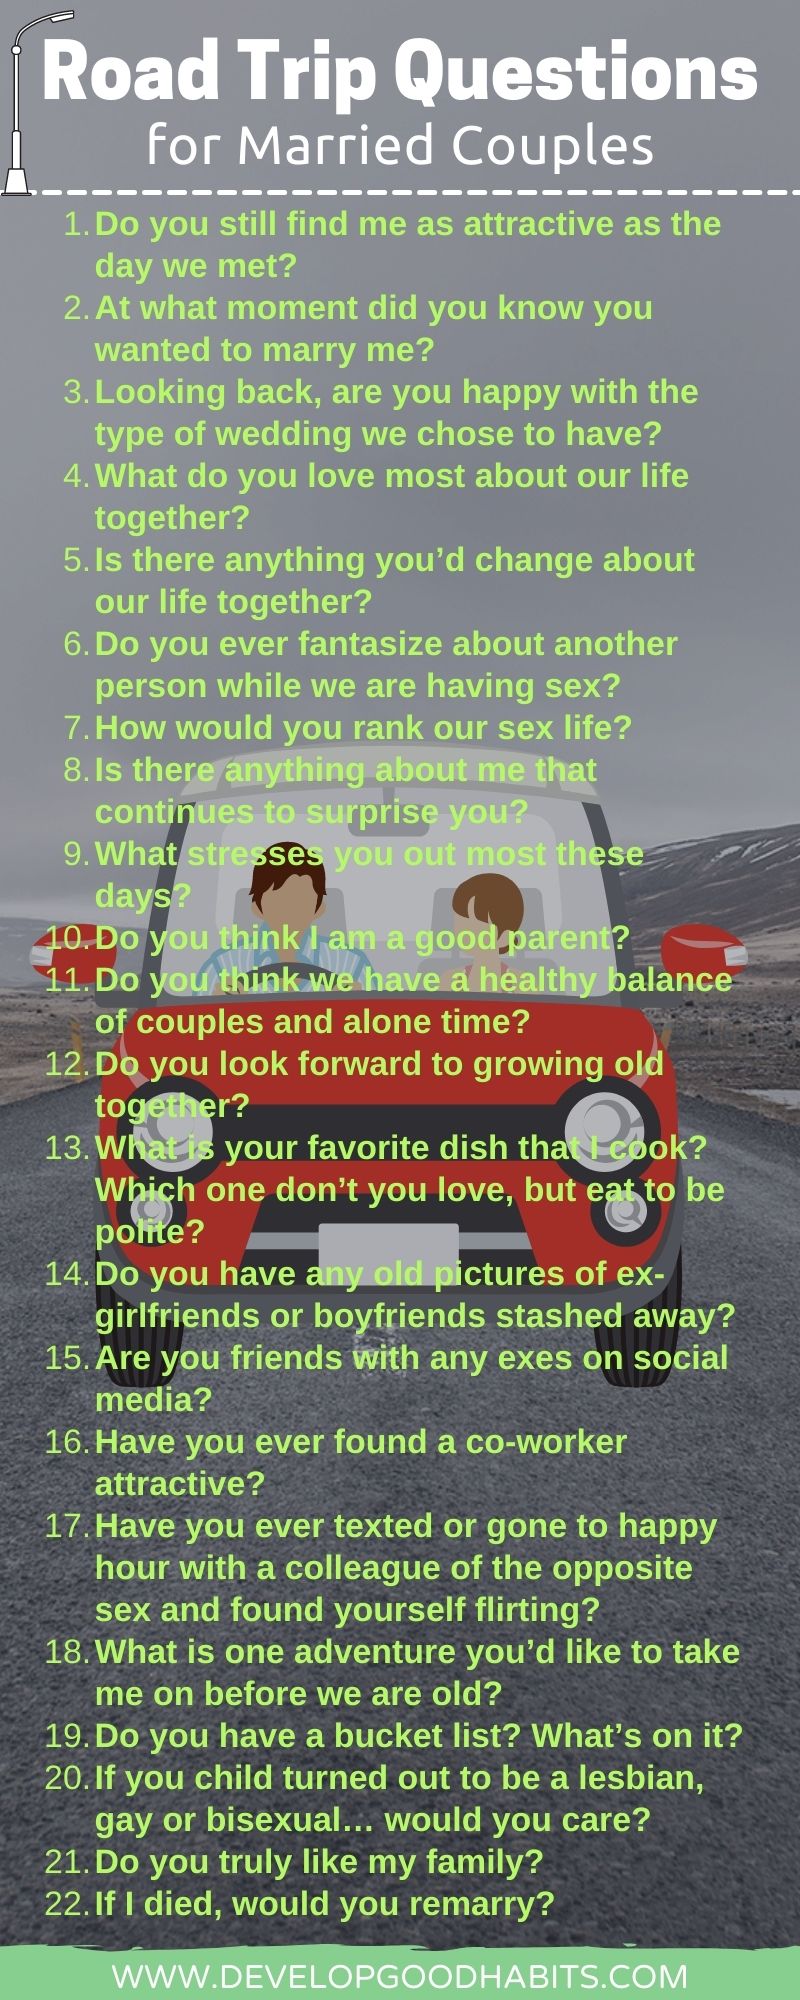 119 Road Trip Questions for Couples on Long Drive or Trip photo